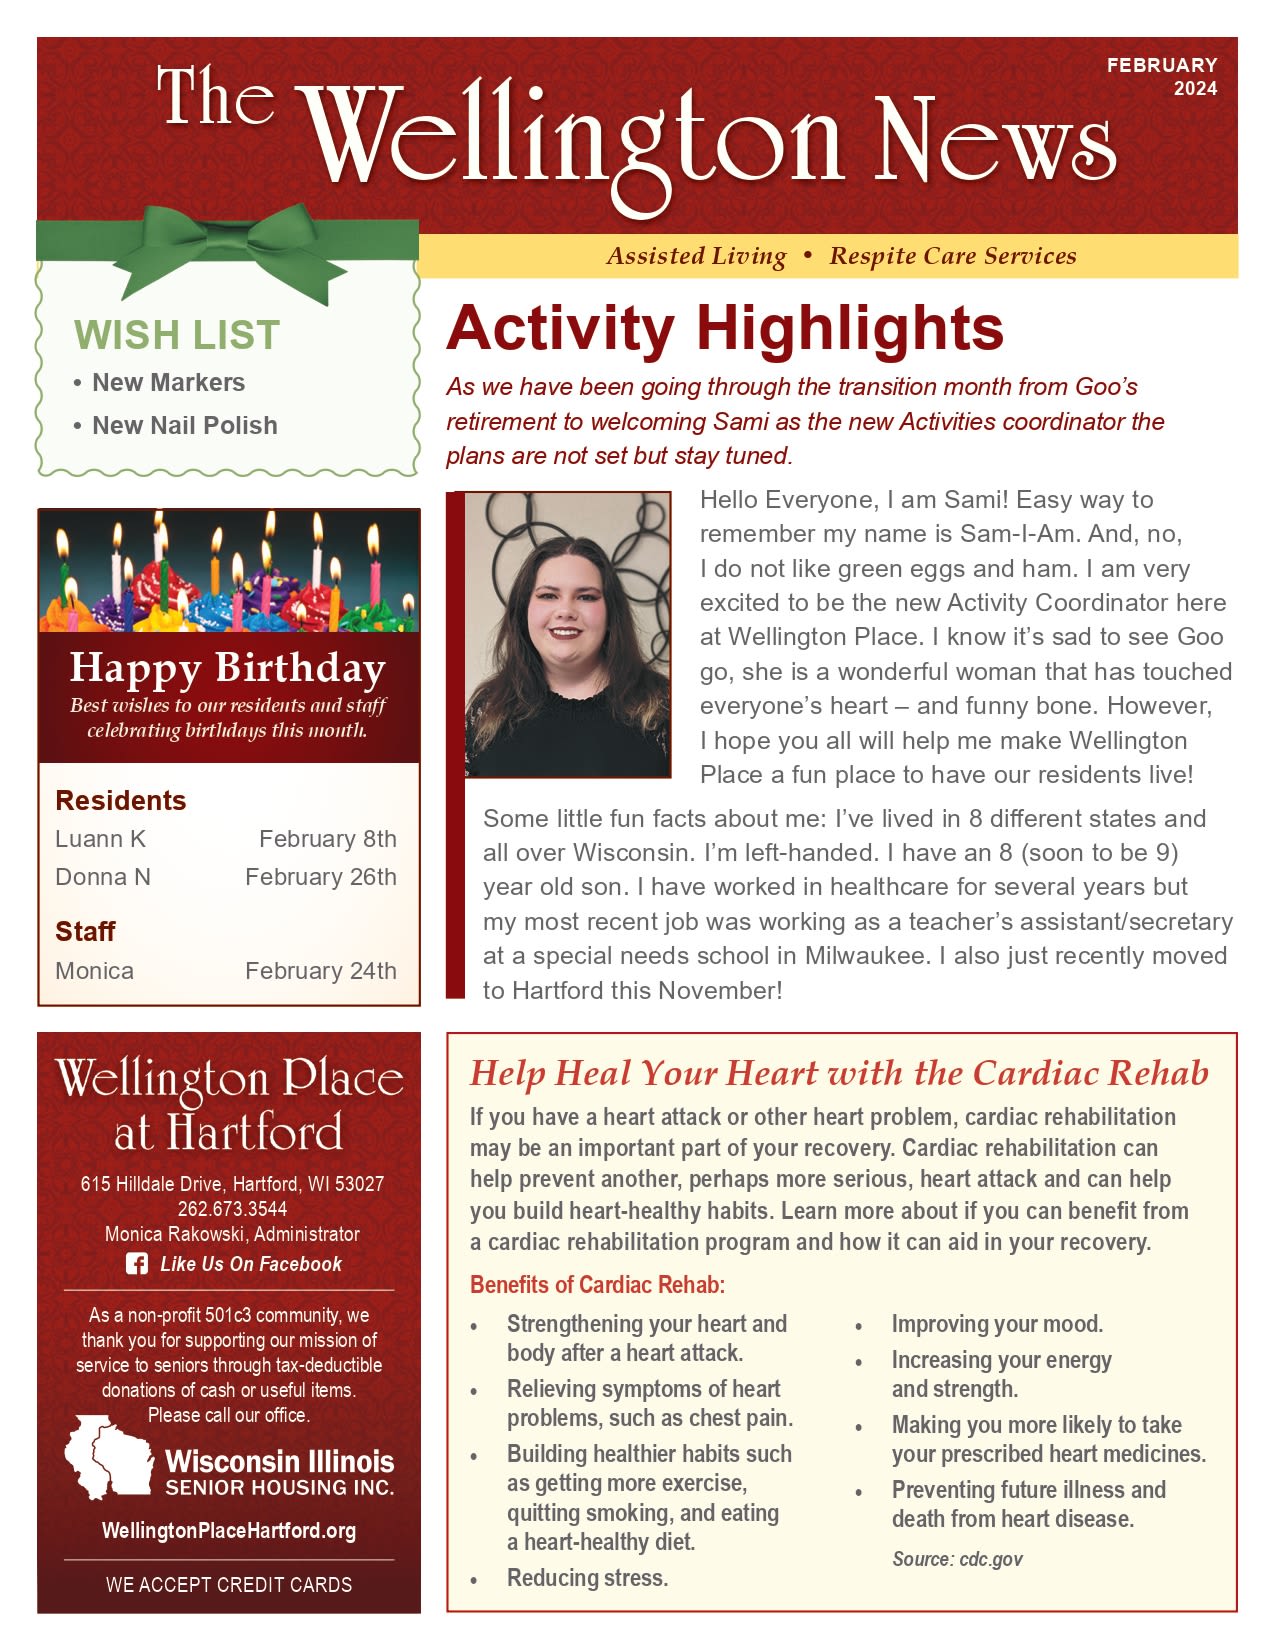 February 2024 Newsletter at Wellington Place at Hartford in Hartford, Wisconsin